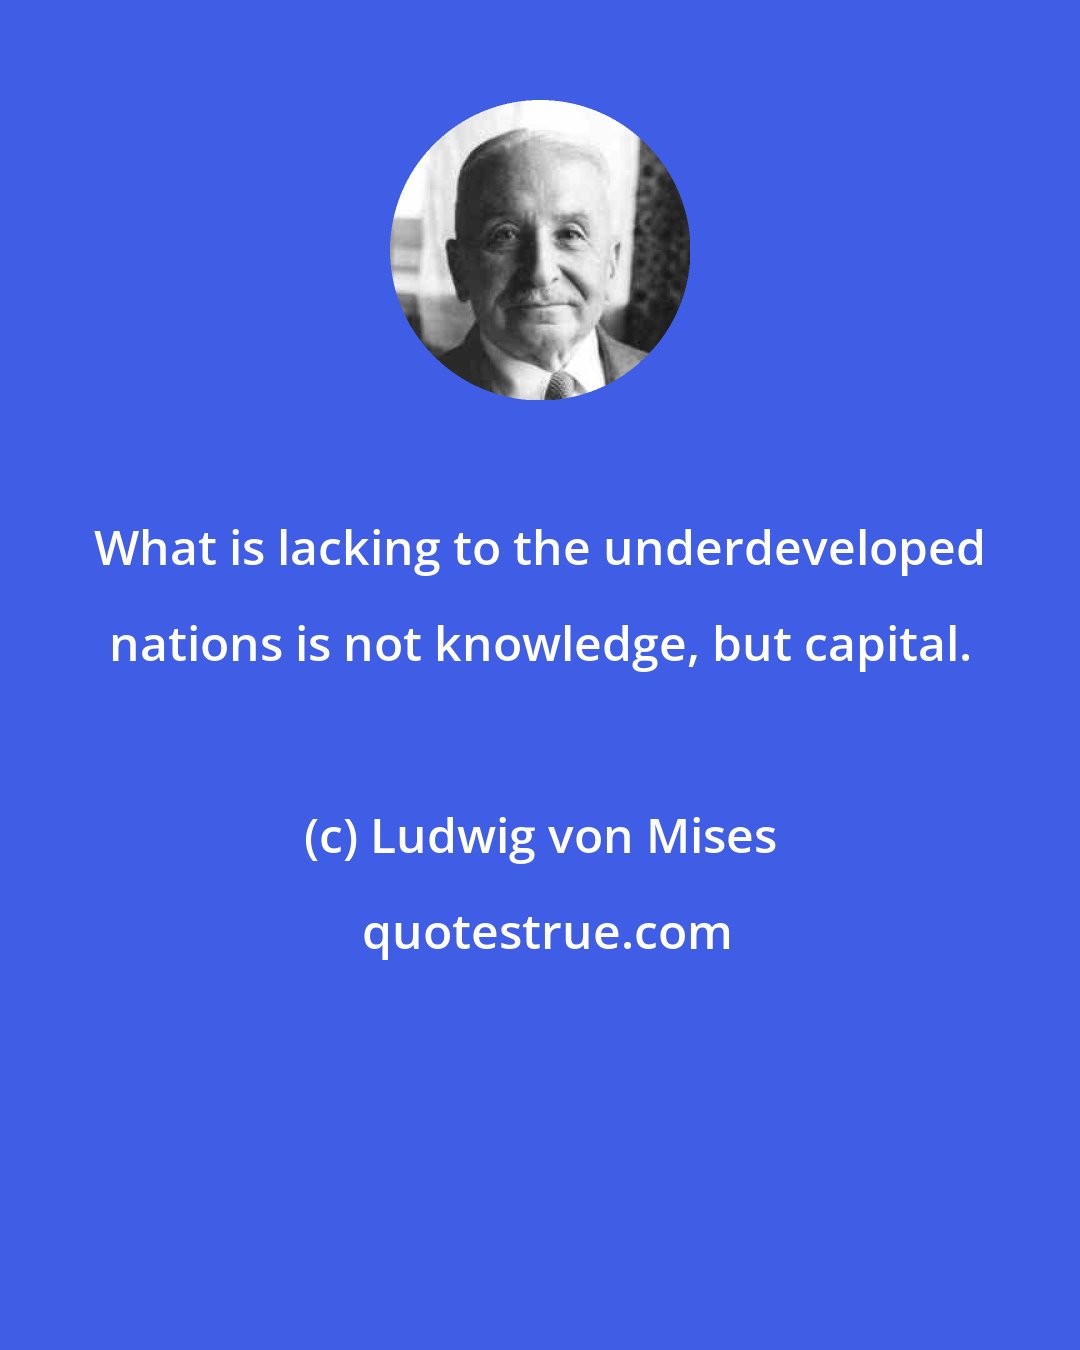 Ludwig von Mises: What is lacking to the underdeveloped nations is not knowledge, but capital.